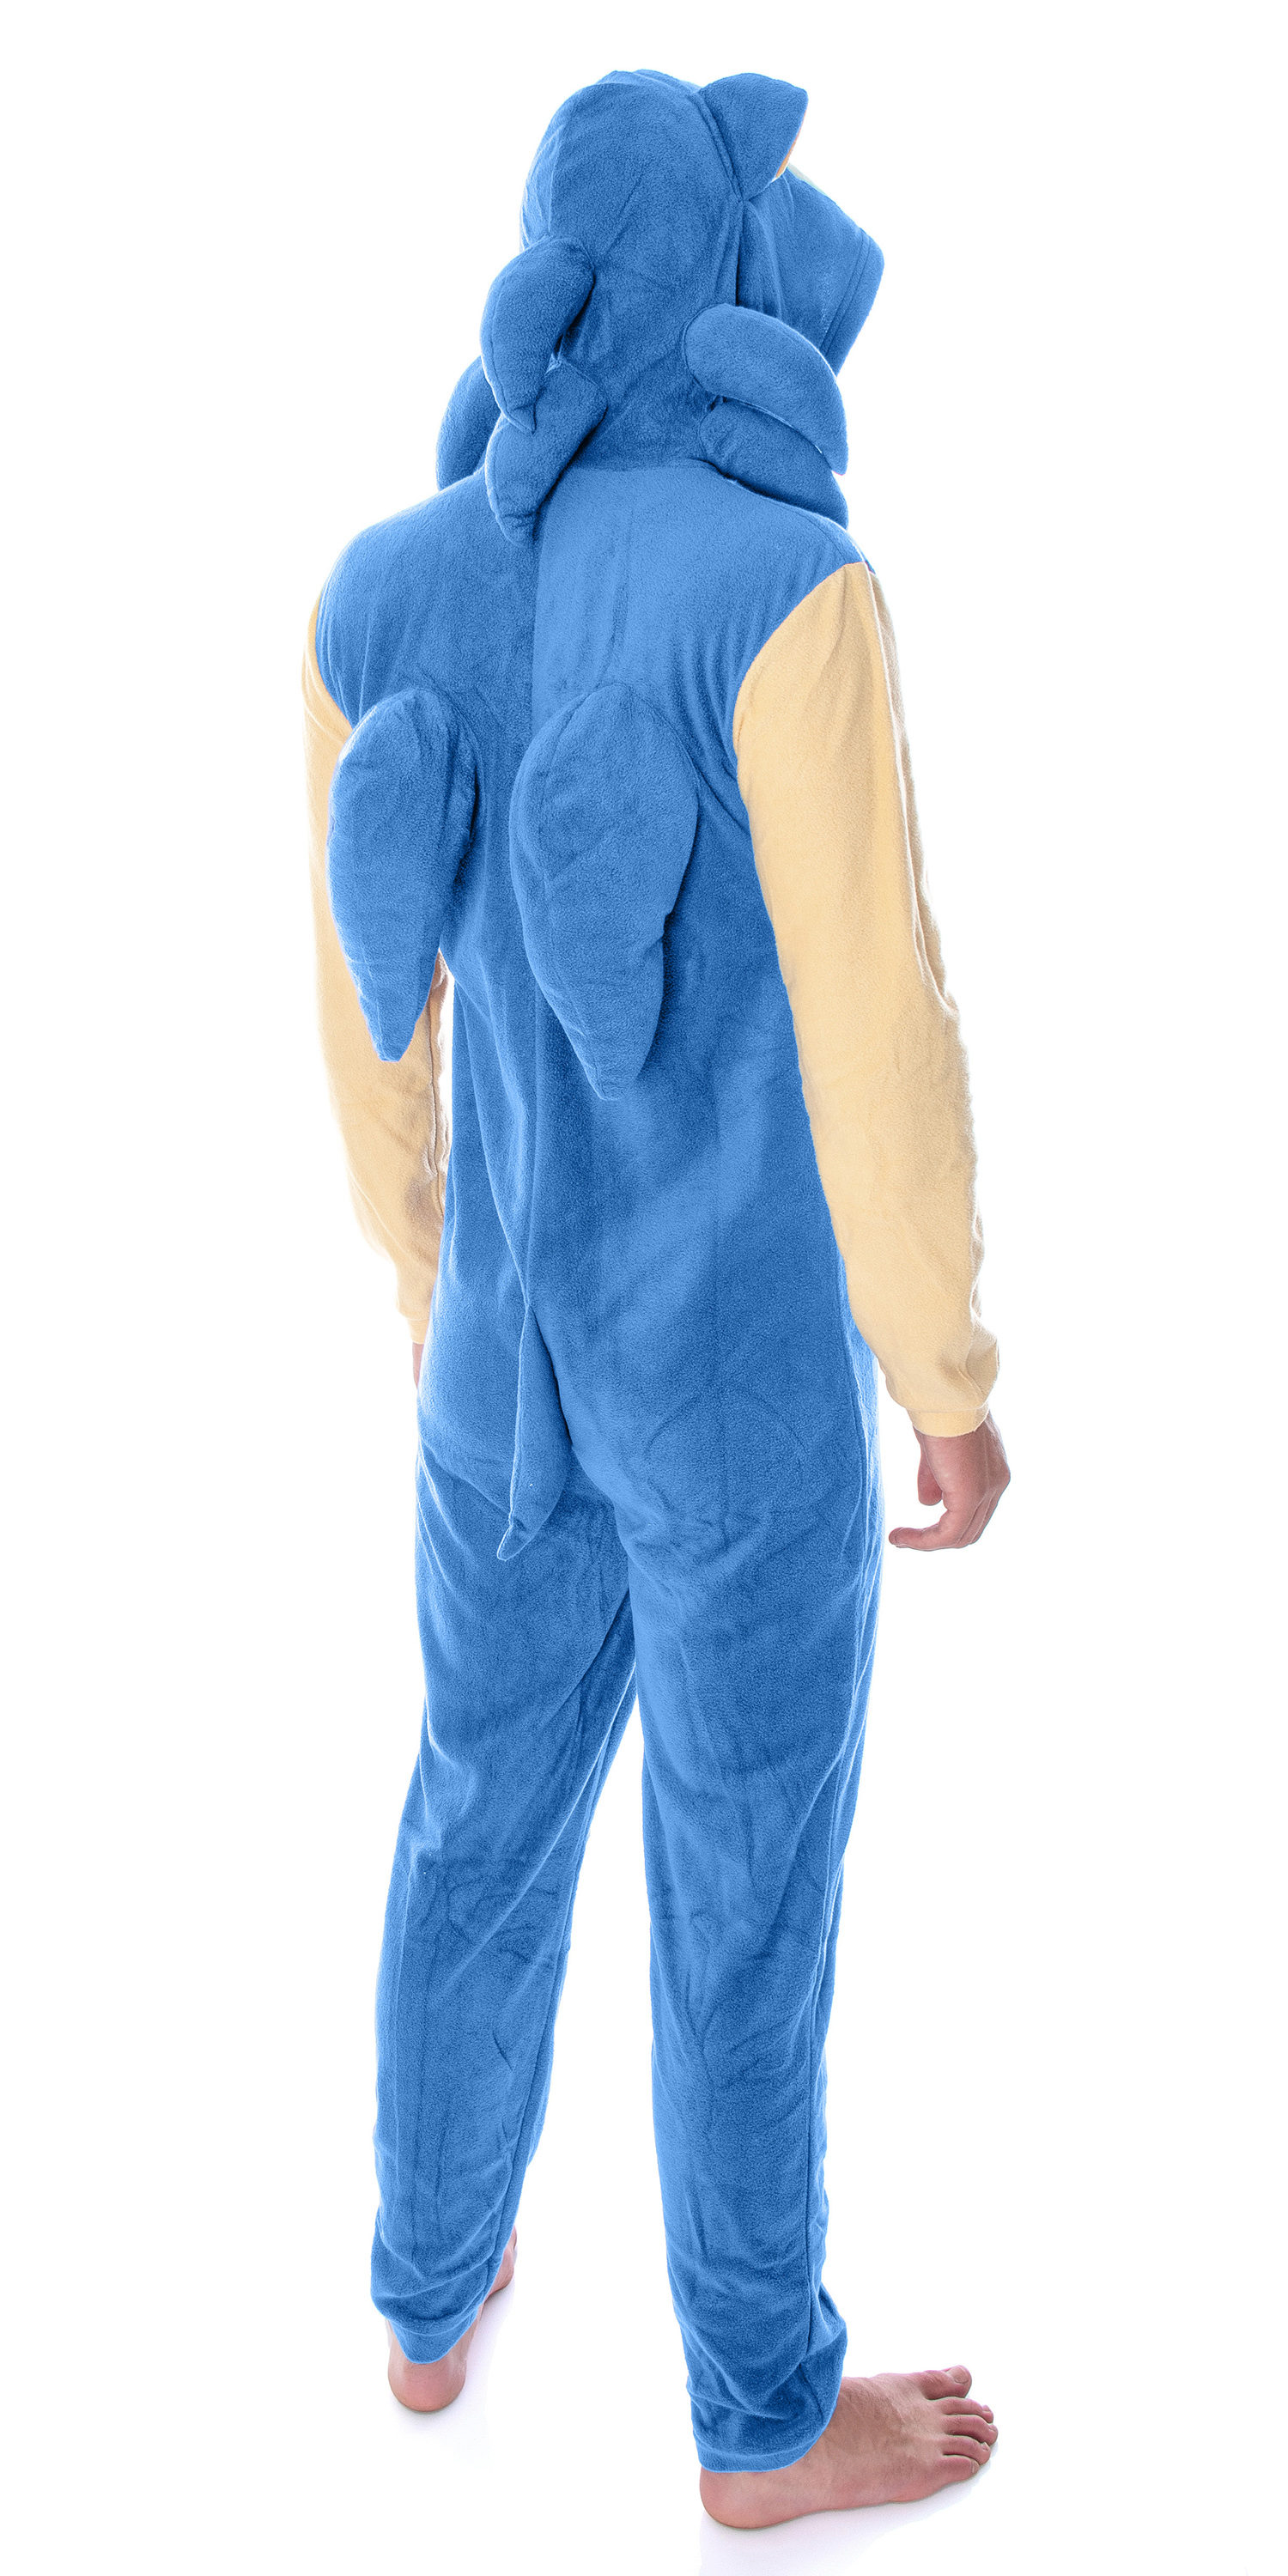 Bioworld Sonic The Hedgehog Men's Video Game Character Costume One-Piece Union Suit Pajama Onesie